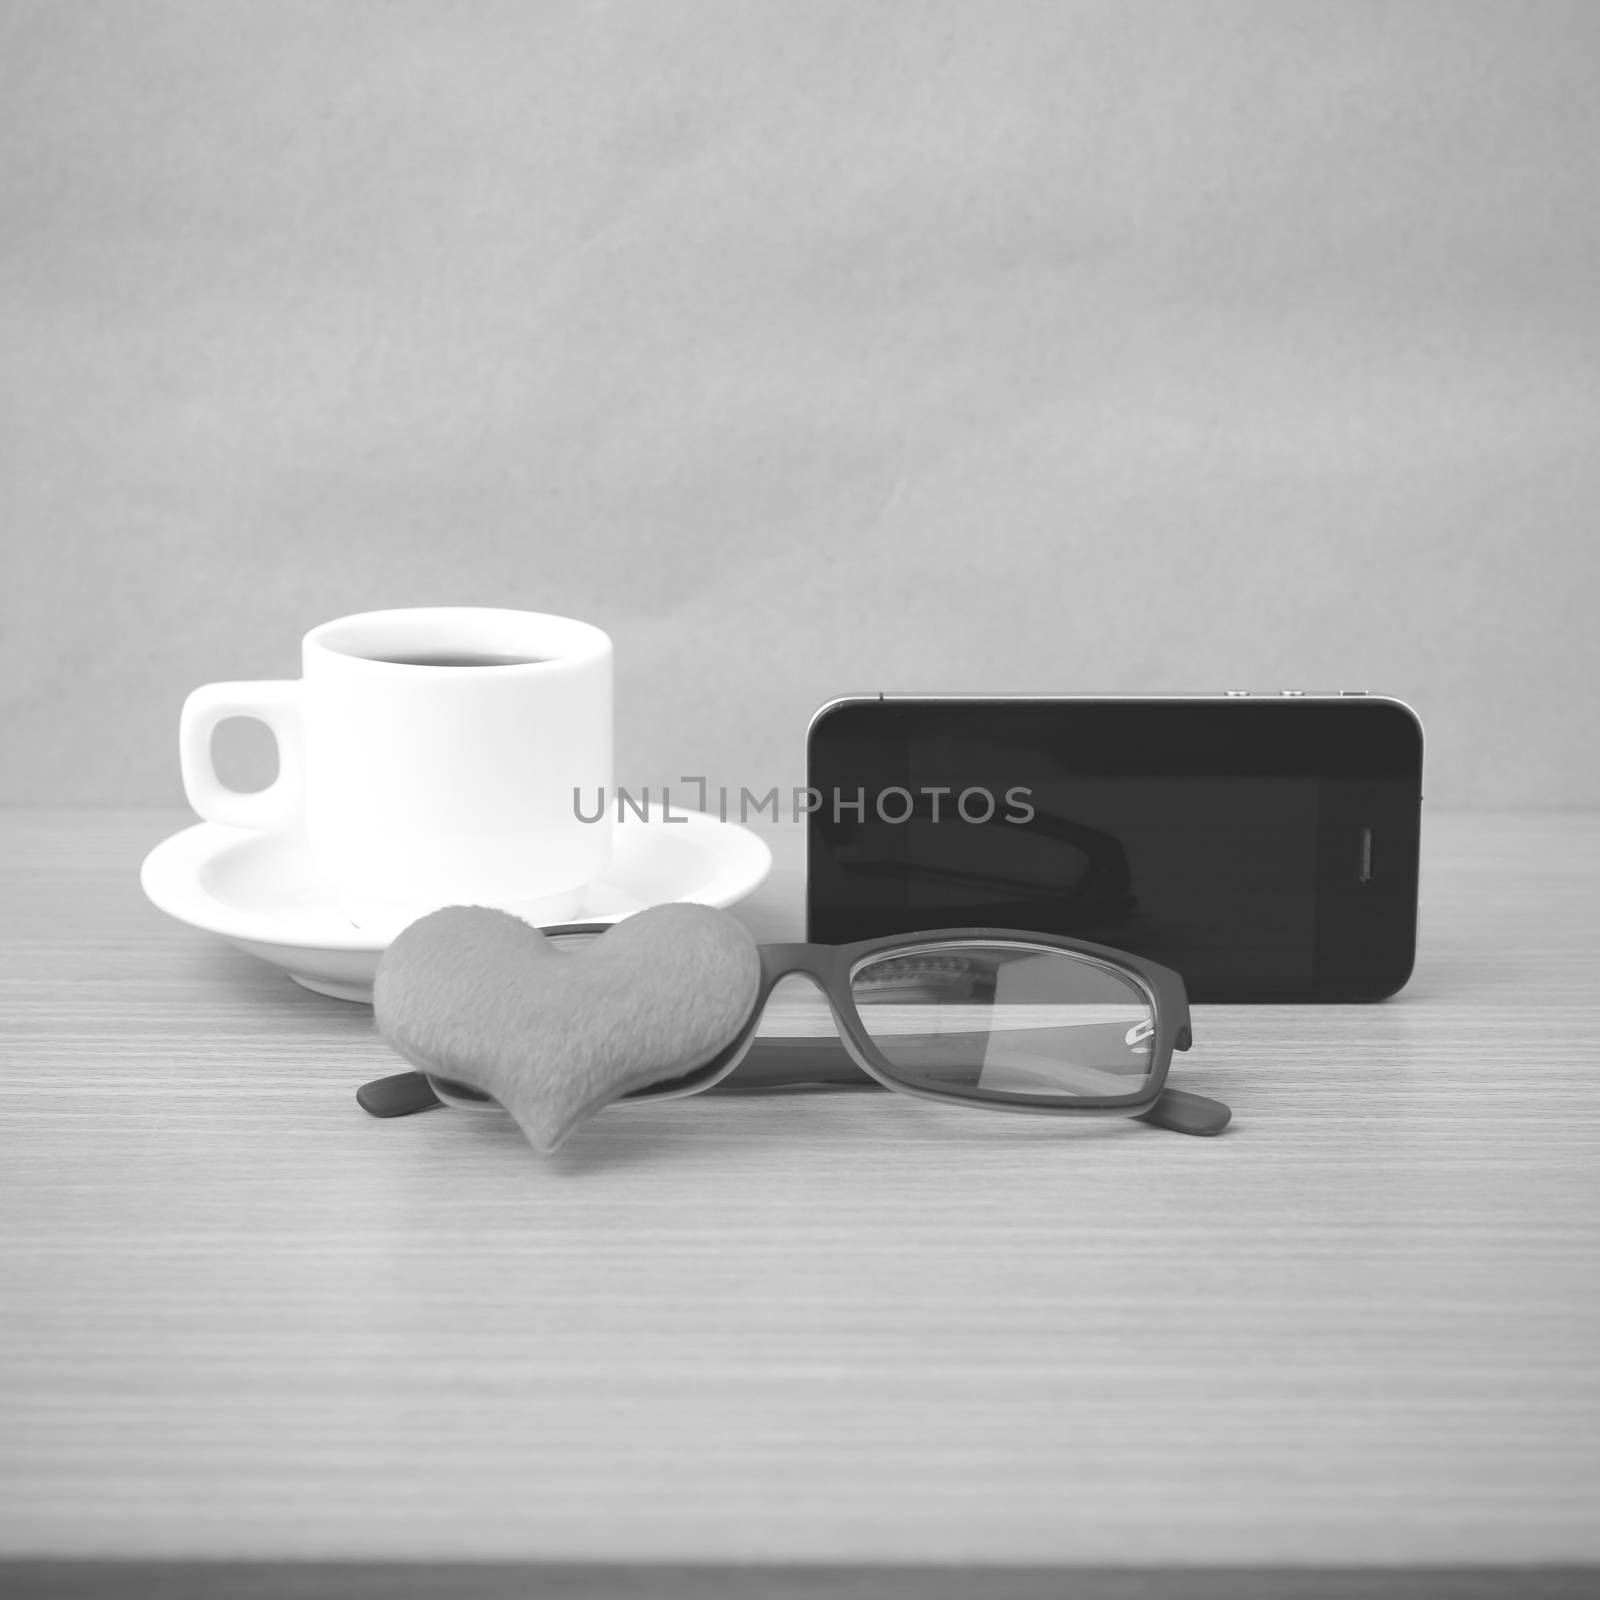 coffee,phone,eyeglasses and heart on wood table background black and white color